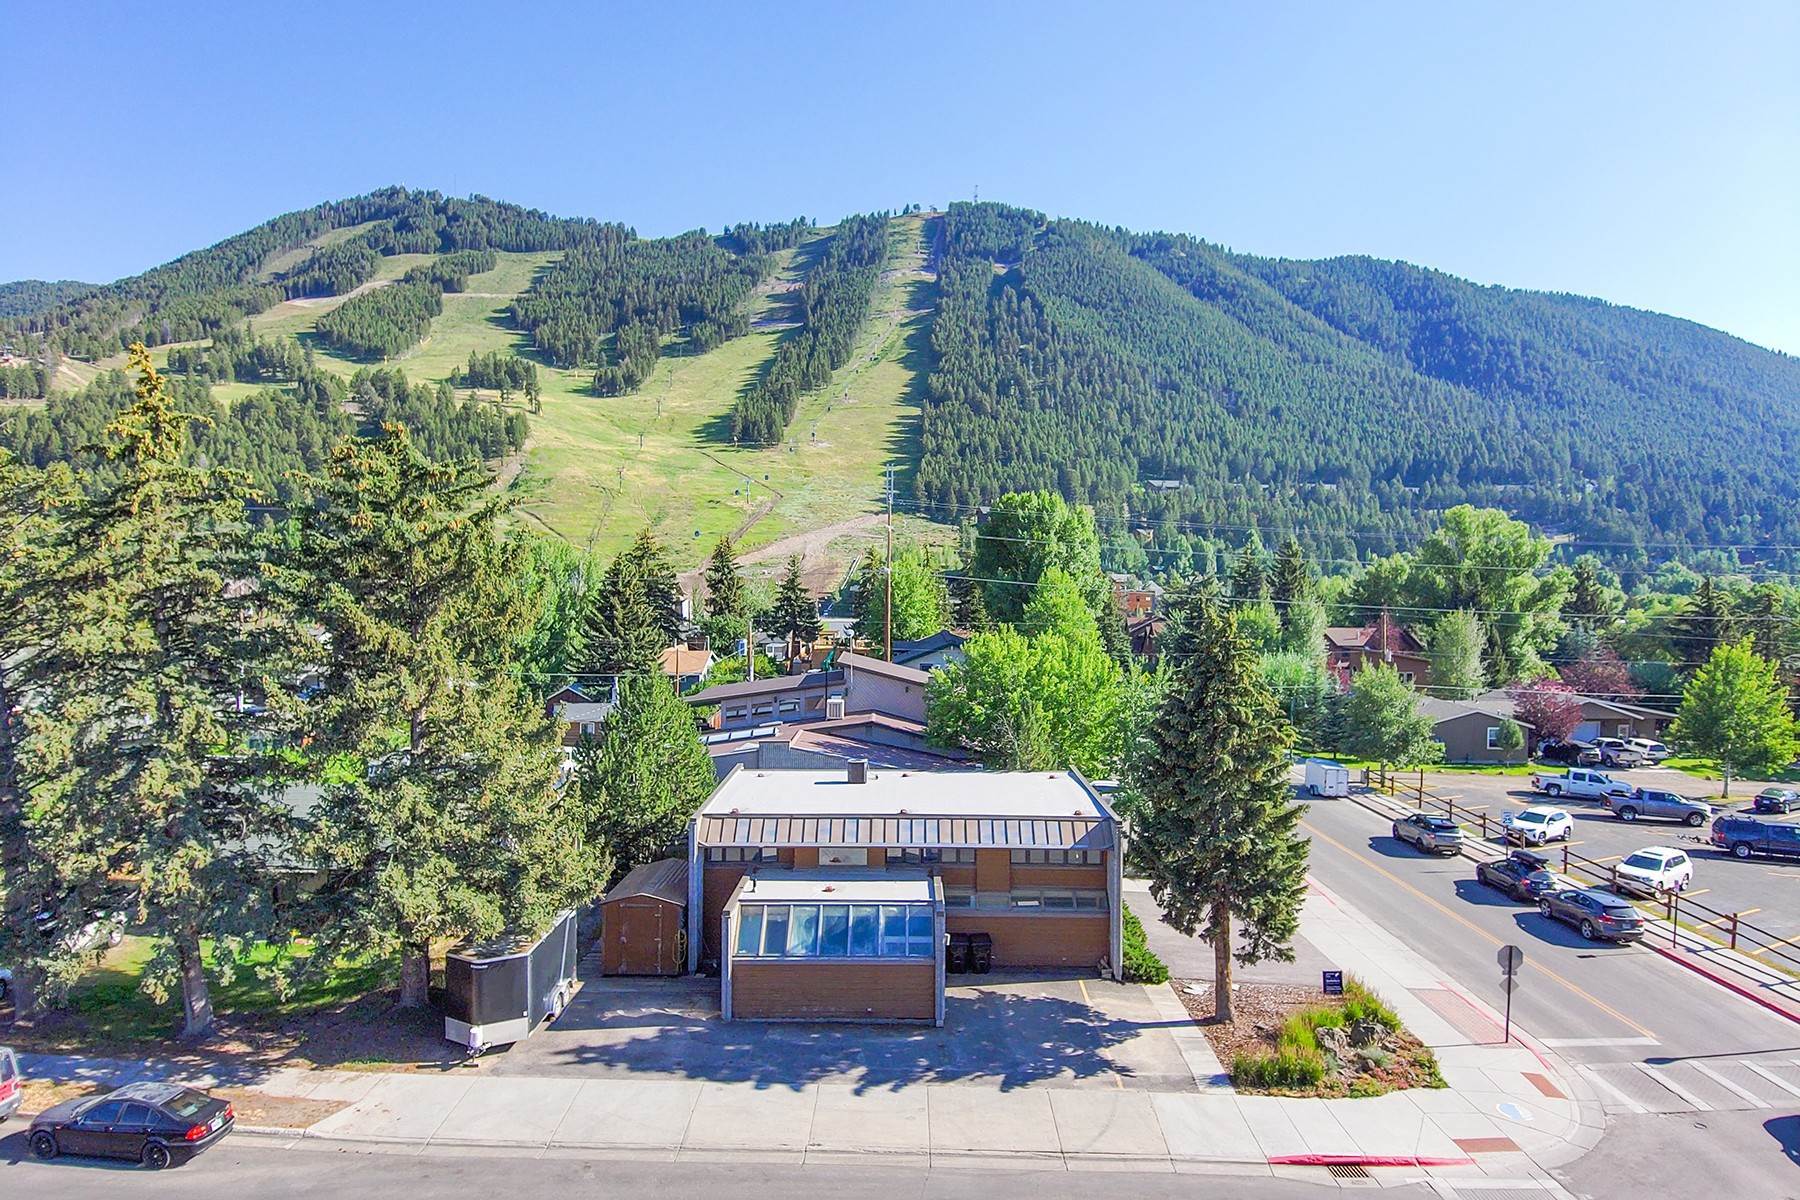 Property for Sale at South Cache Street 410 S Cache Street Jackson, Wyoming 83001 United States